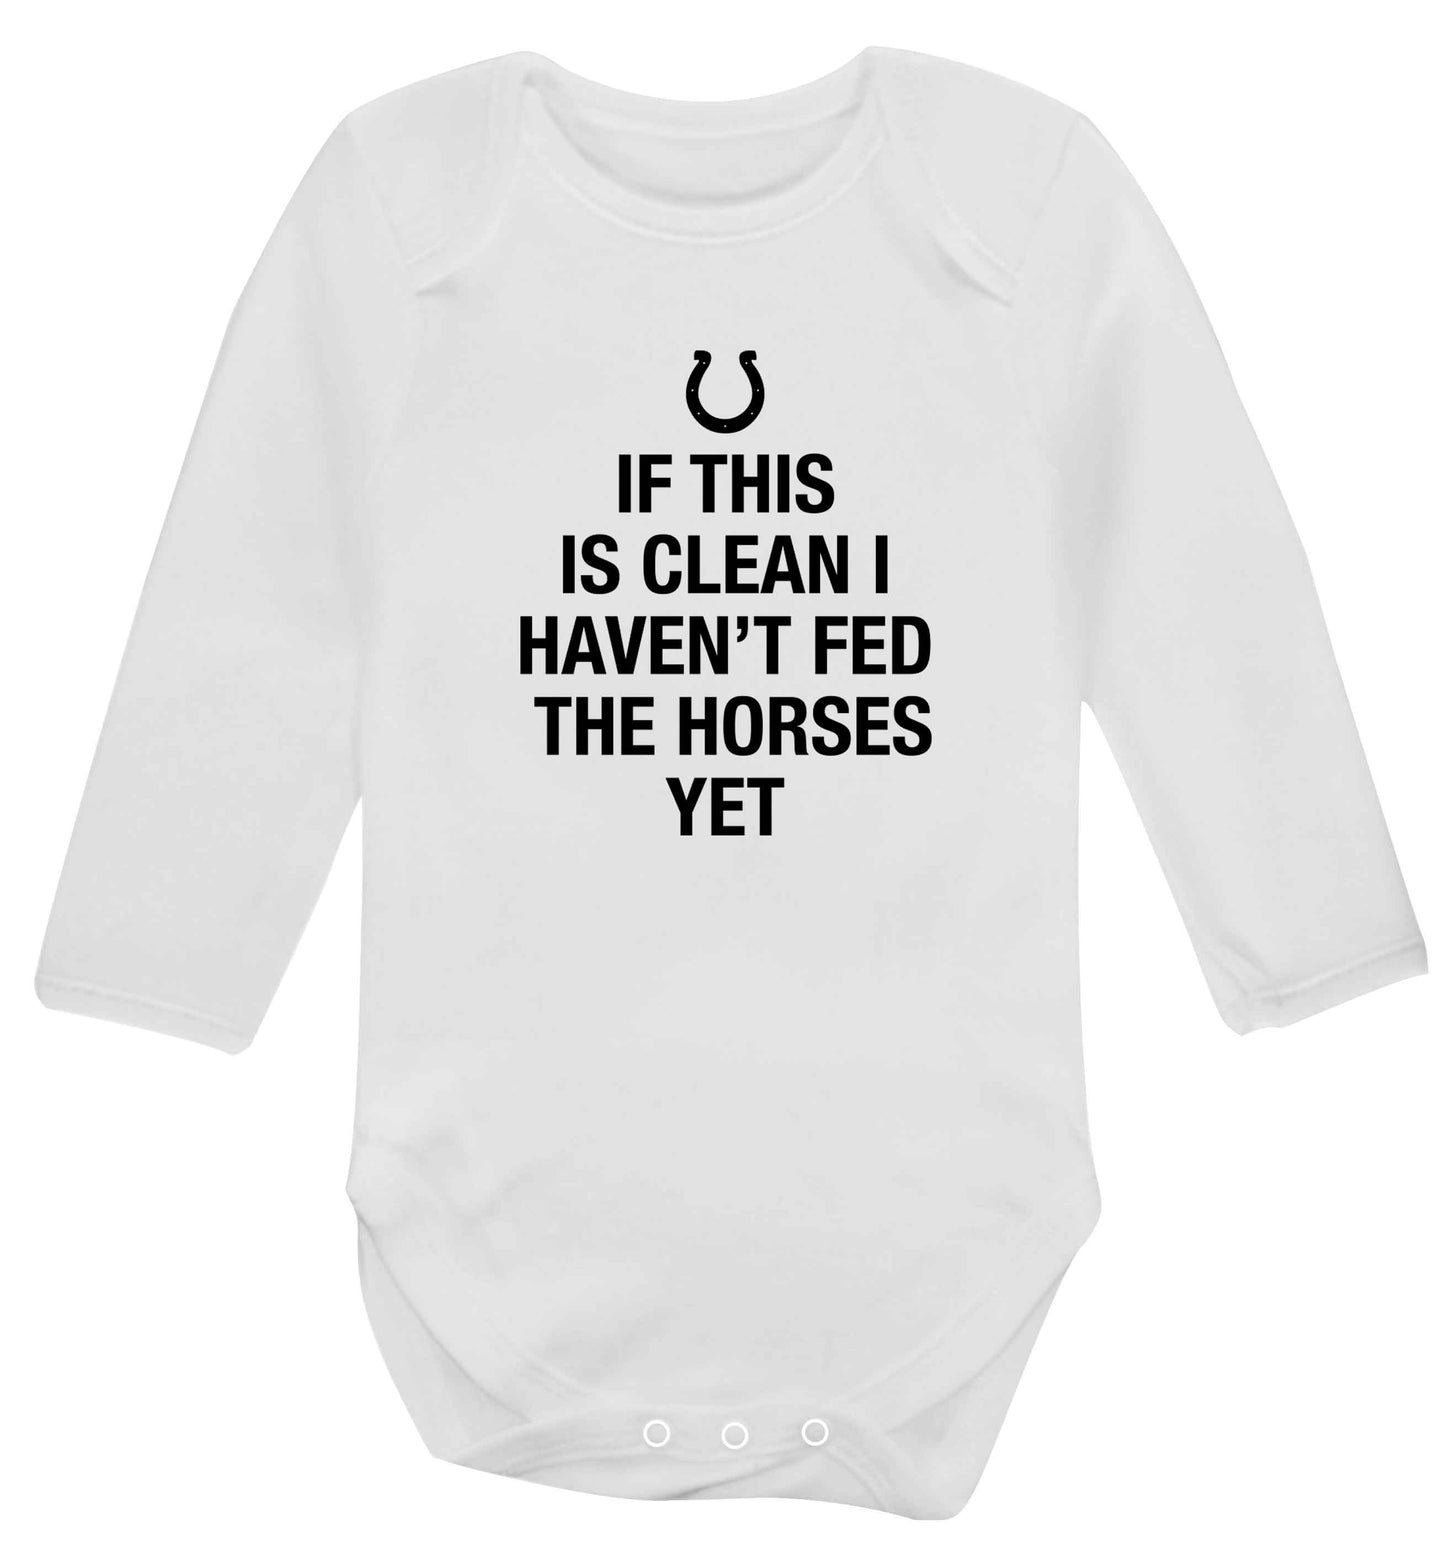 If this isn't clean I haven't fed the horses yet baby vest long sleeved white 6-12 months